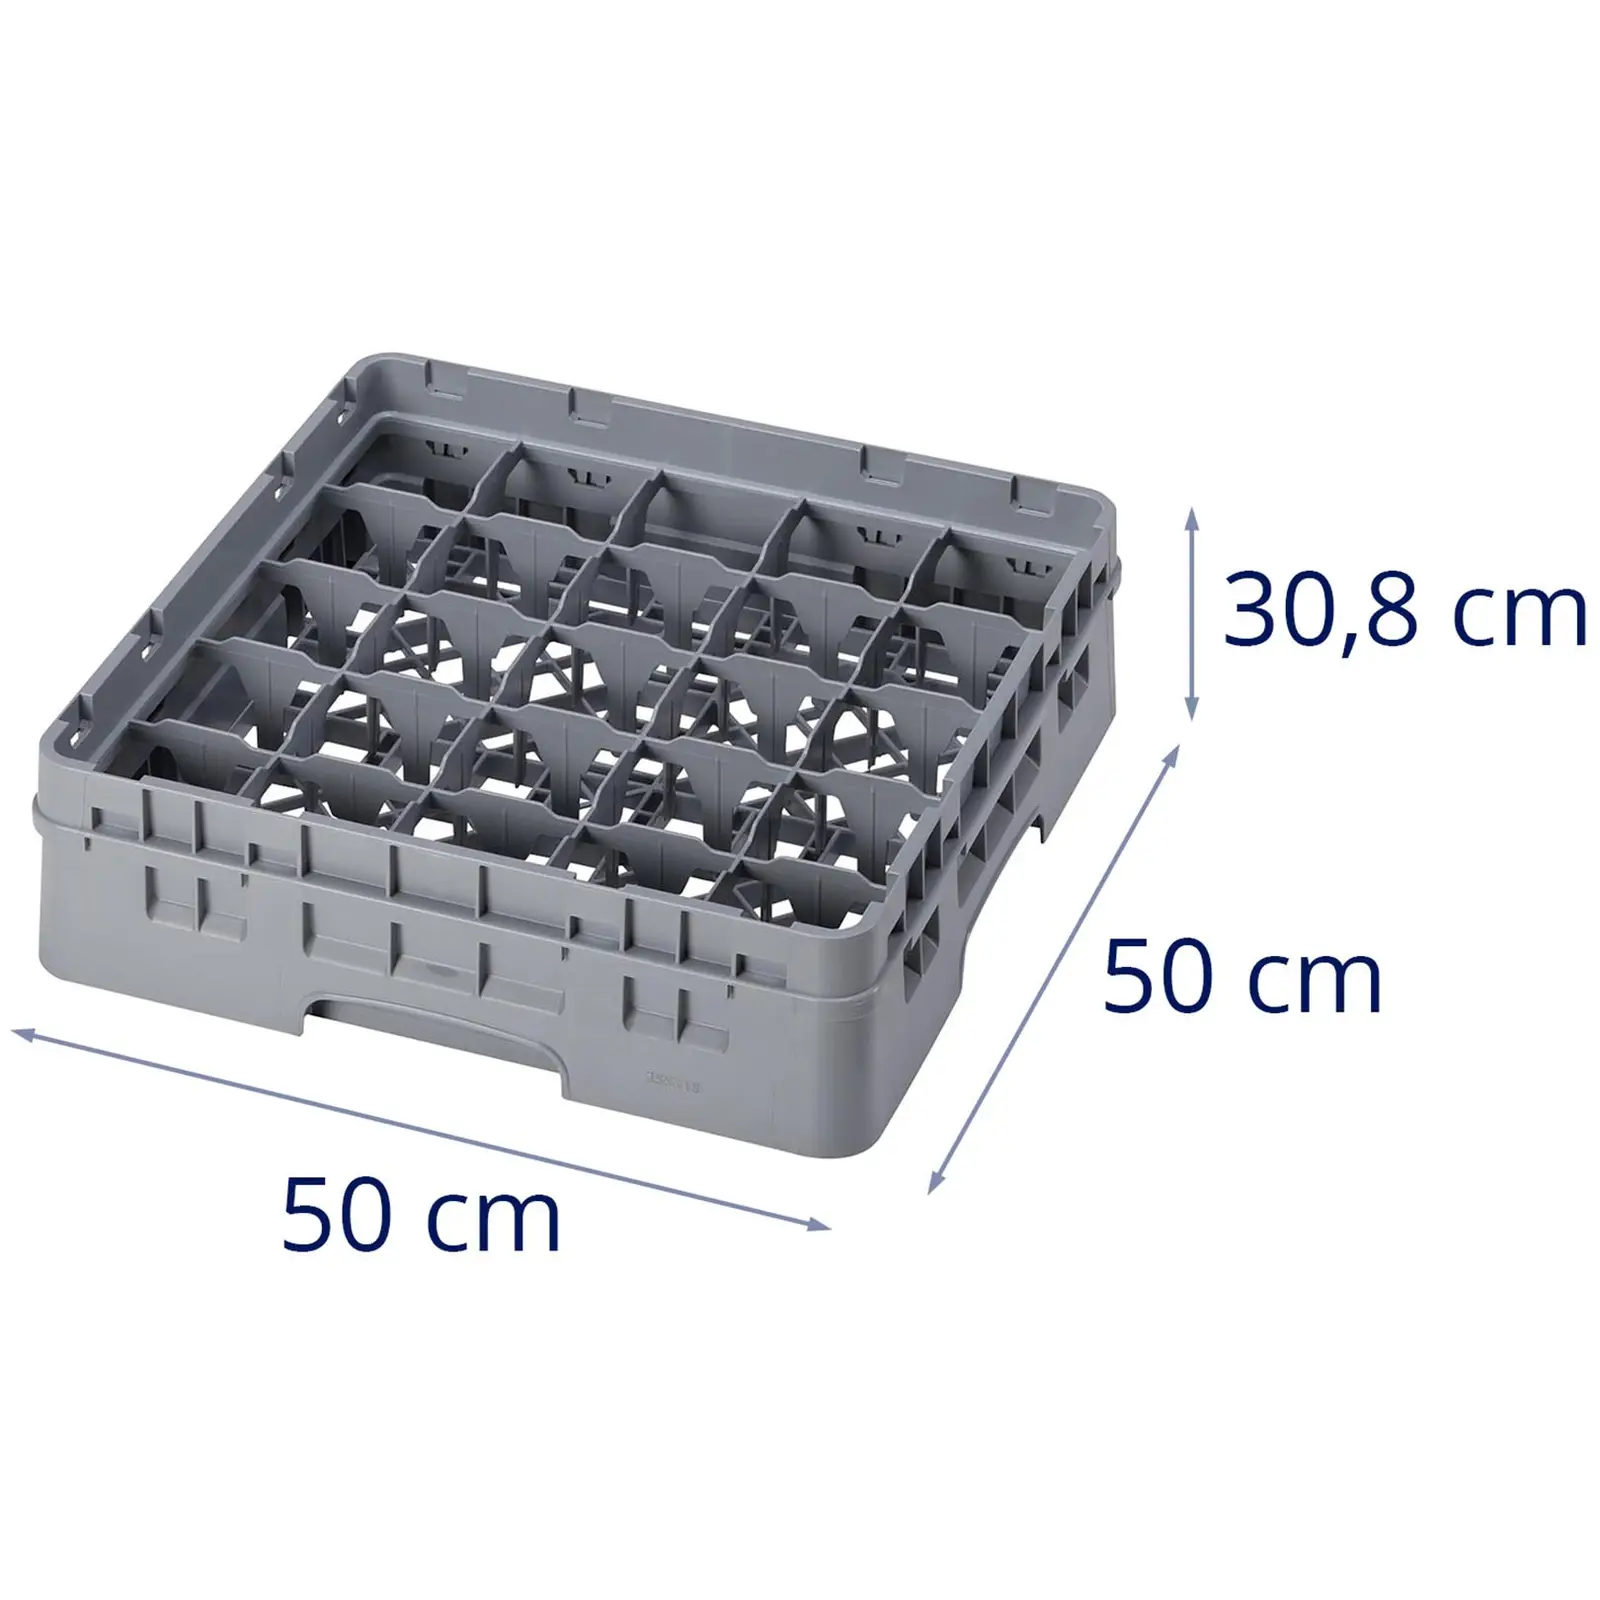 Glass Rack - 20 compartments - 50 x 50 x 30,8 cm - glass height: 25,7 cm